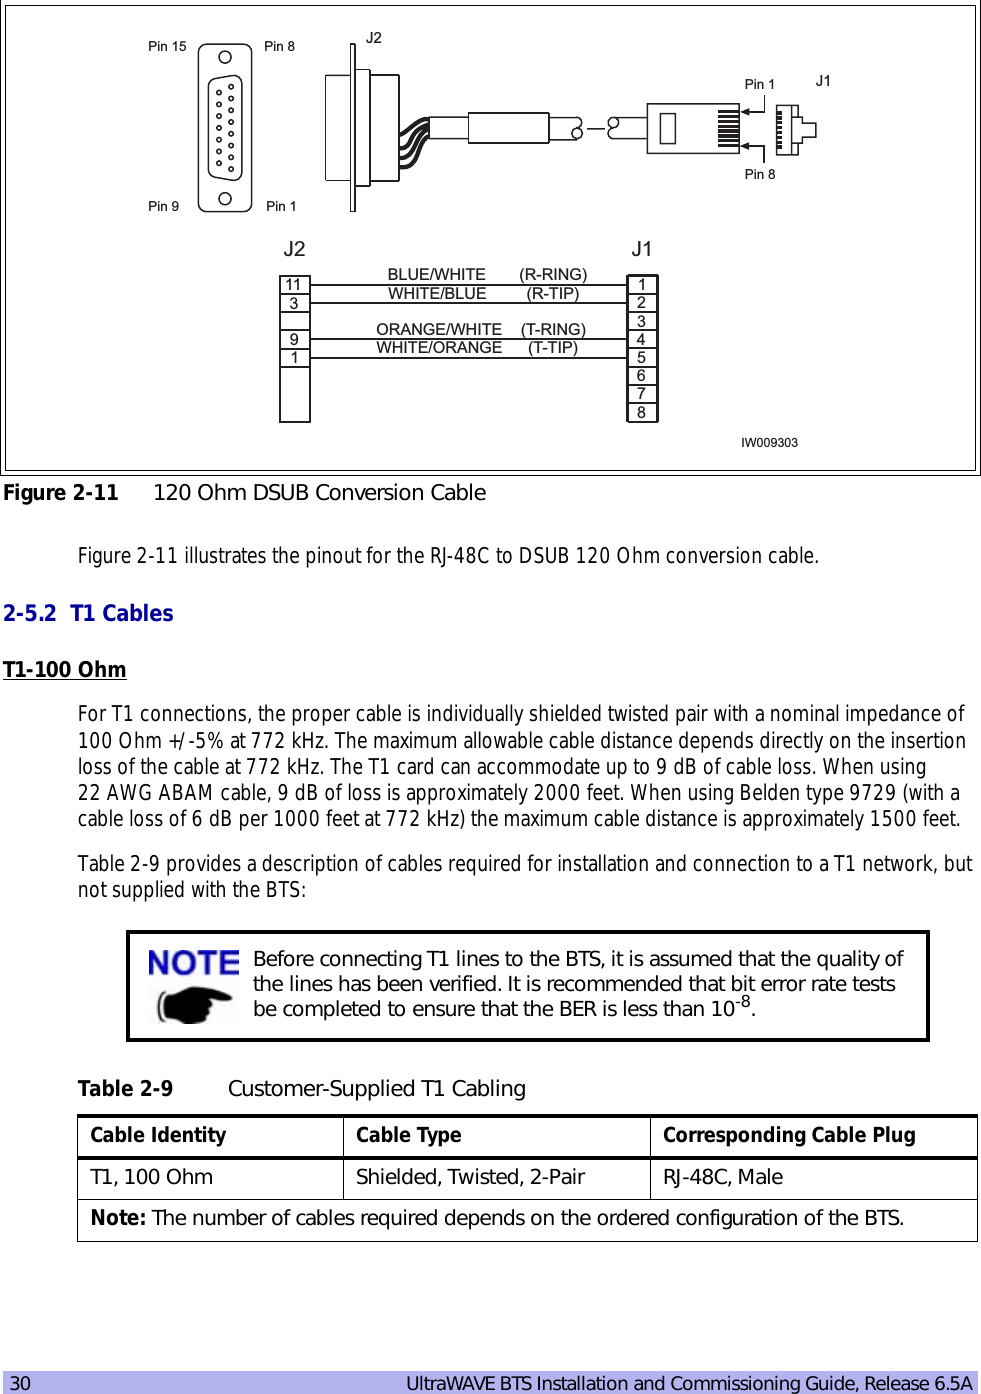 30   UltraWAVE BTS Installation and Commissioning Guide, Release 6.5AFigure 2-11 illustrates the pinout for the RJ-48C to DSUB 120 Ohm conversion cable.2-5.2  T1 CablesT1-100 OhmFor T1 connections, the proper cable is individually shielded twisted pair with a nominal impedance of 100 Ohm +/-5% at 772 kHz. The maximum allowable cable distance depends directly on the insertion loss of the cable at 772 kHz. The T1 card can accommodate up to 9 dB of cable loss. When using 22 AWG ABAM cable, 9 dB of loss is approximately 2000 feet. When using Belden type 9729 (with a cable loss of 6 dB per 1000 feet at 772 kHz) the maximum cable distance is approximately 1500 feet.Table 2-9 provides a description of cables required for installation and connection to a T1 network, but not supplied with the BTS:Figure 2-11 120 Ohm DSUB Conversion CableBefore connecting T1 lines to the BTS, it is assumed that the quality of the lines has been verified. It is recommended that bit error rate tests be completed to ensure that the BER is less than 10-8.Table 2-9 Customer-Supplied T1 CablingCable Identity Cable Type Corresponding Cable PlugT1, 100 Ohm Shielded, Twisted, 2-Pair RJ-48C, MaleNote: The number of cables required depends on the ordered configuration of the BTS.31119IW0093038ORANGE/WHITEBLUE/WHITEWHITE/ORANGEWHITE/BLUE (R-TIP)(R-RING)(T-TIP)(T-RING)1235674J2 J1Pin 9J1J2Pin 1Pin 15 Pin 8Pin 1Pin 8